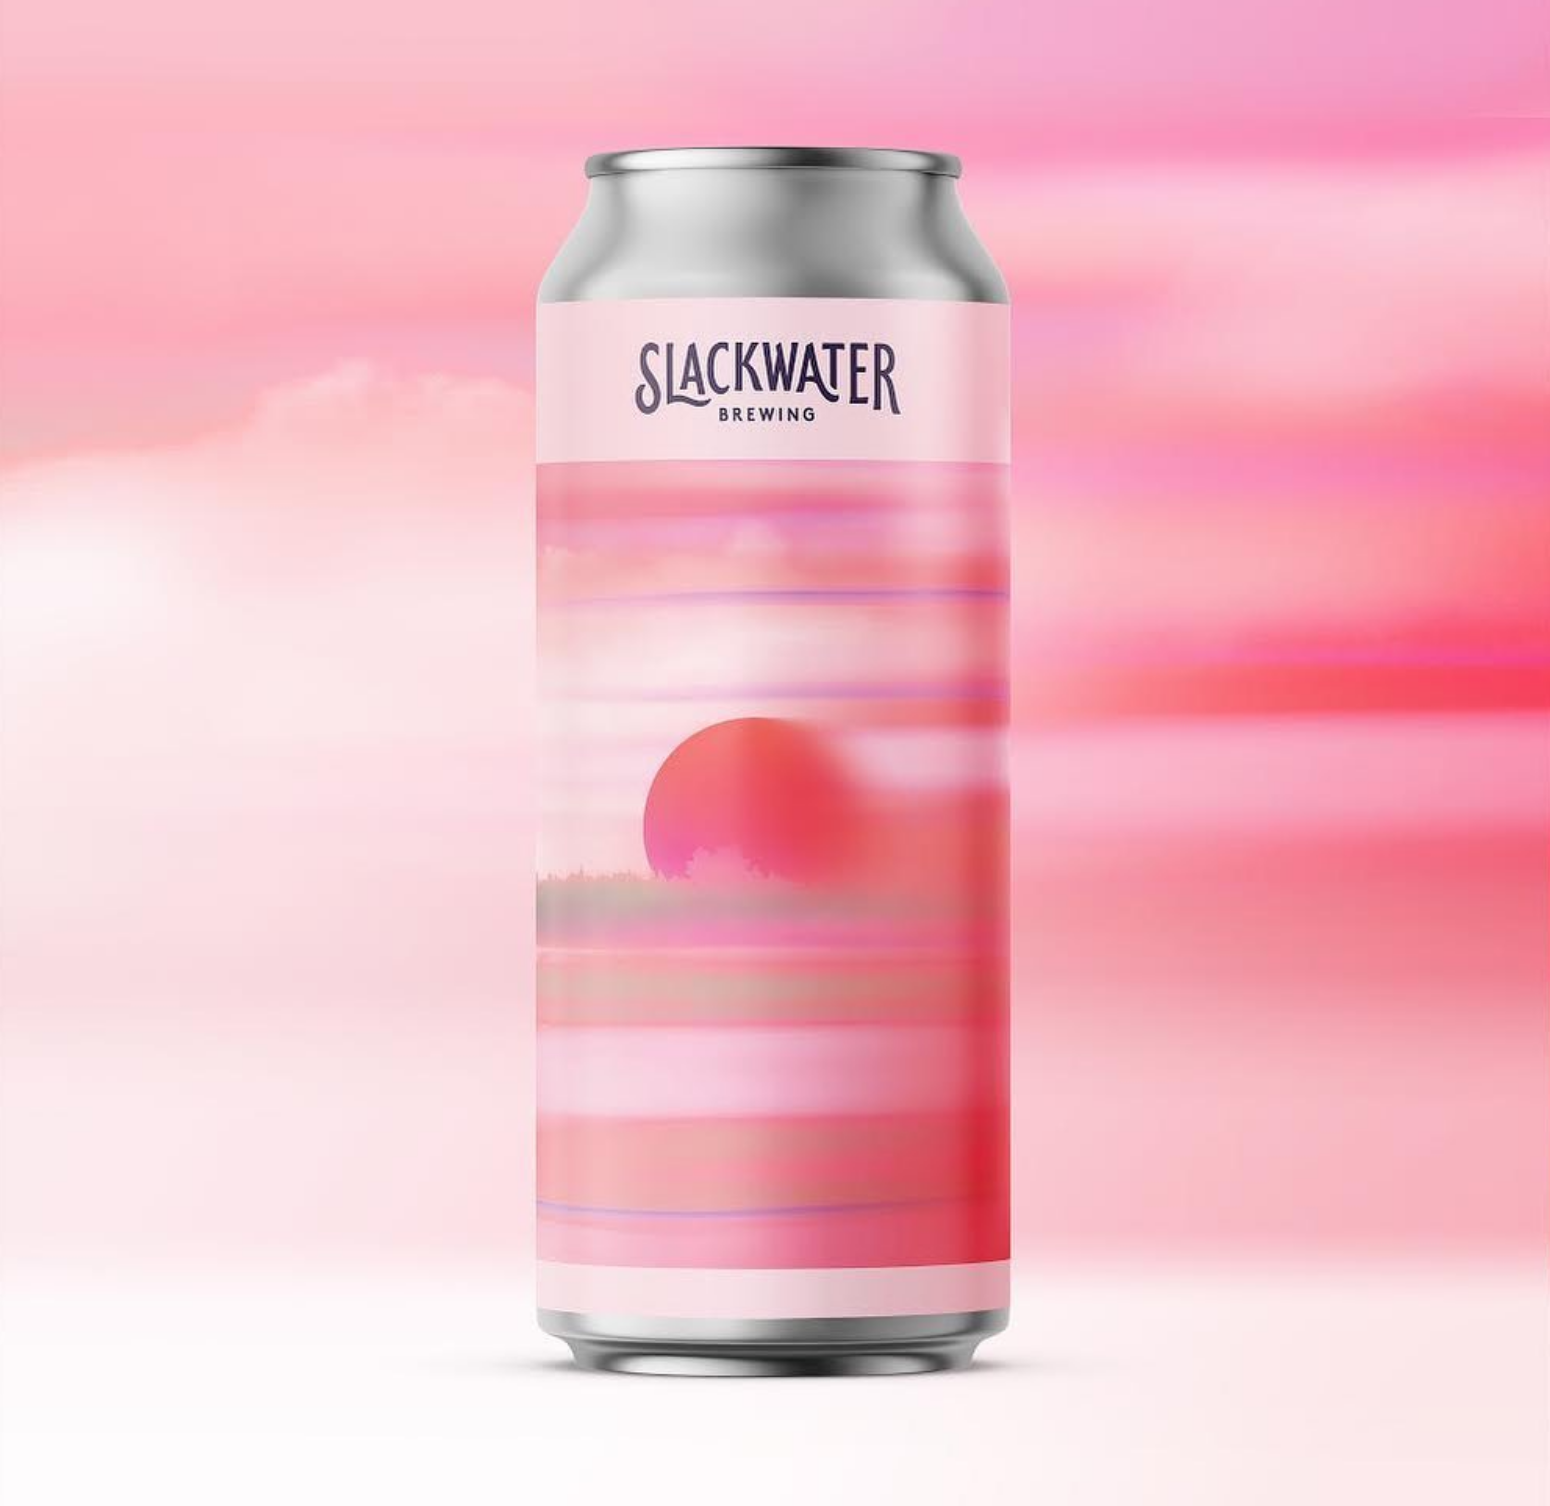 What The Fog?! by Slackwater Brewing